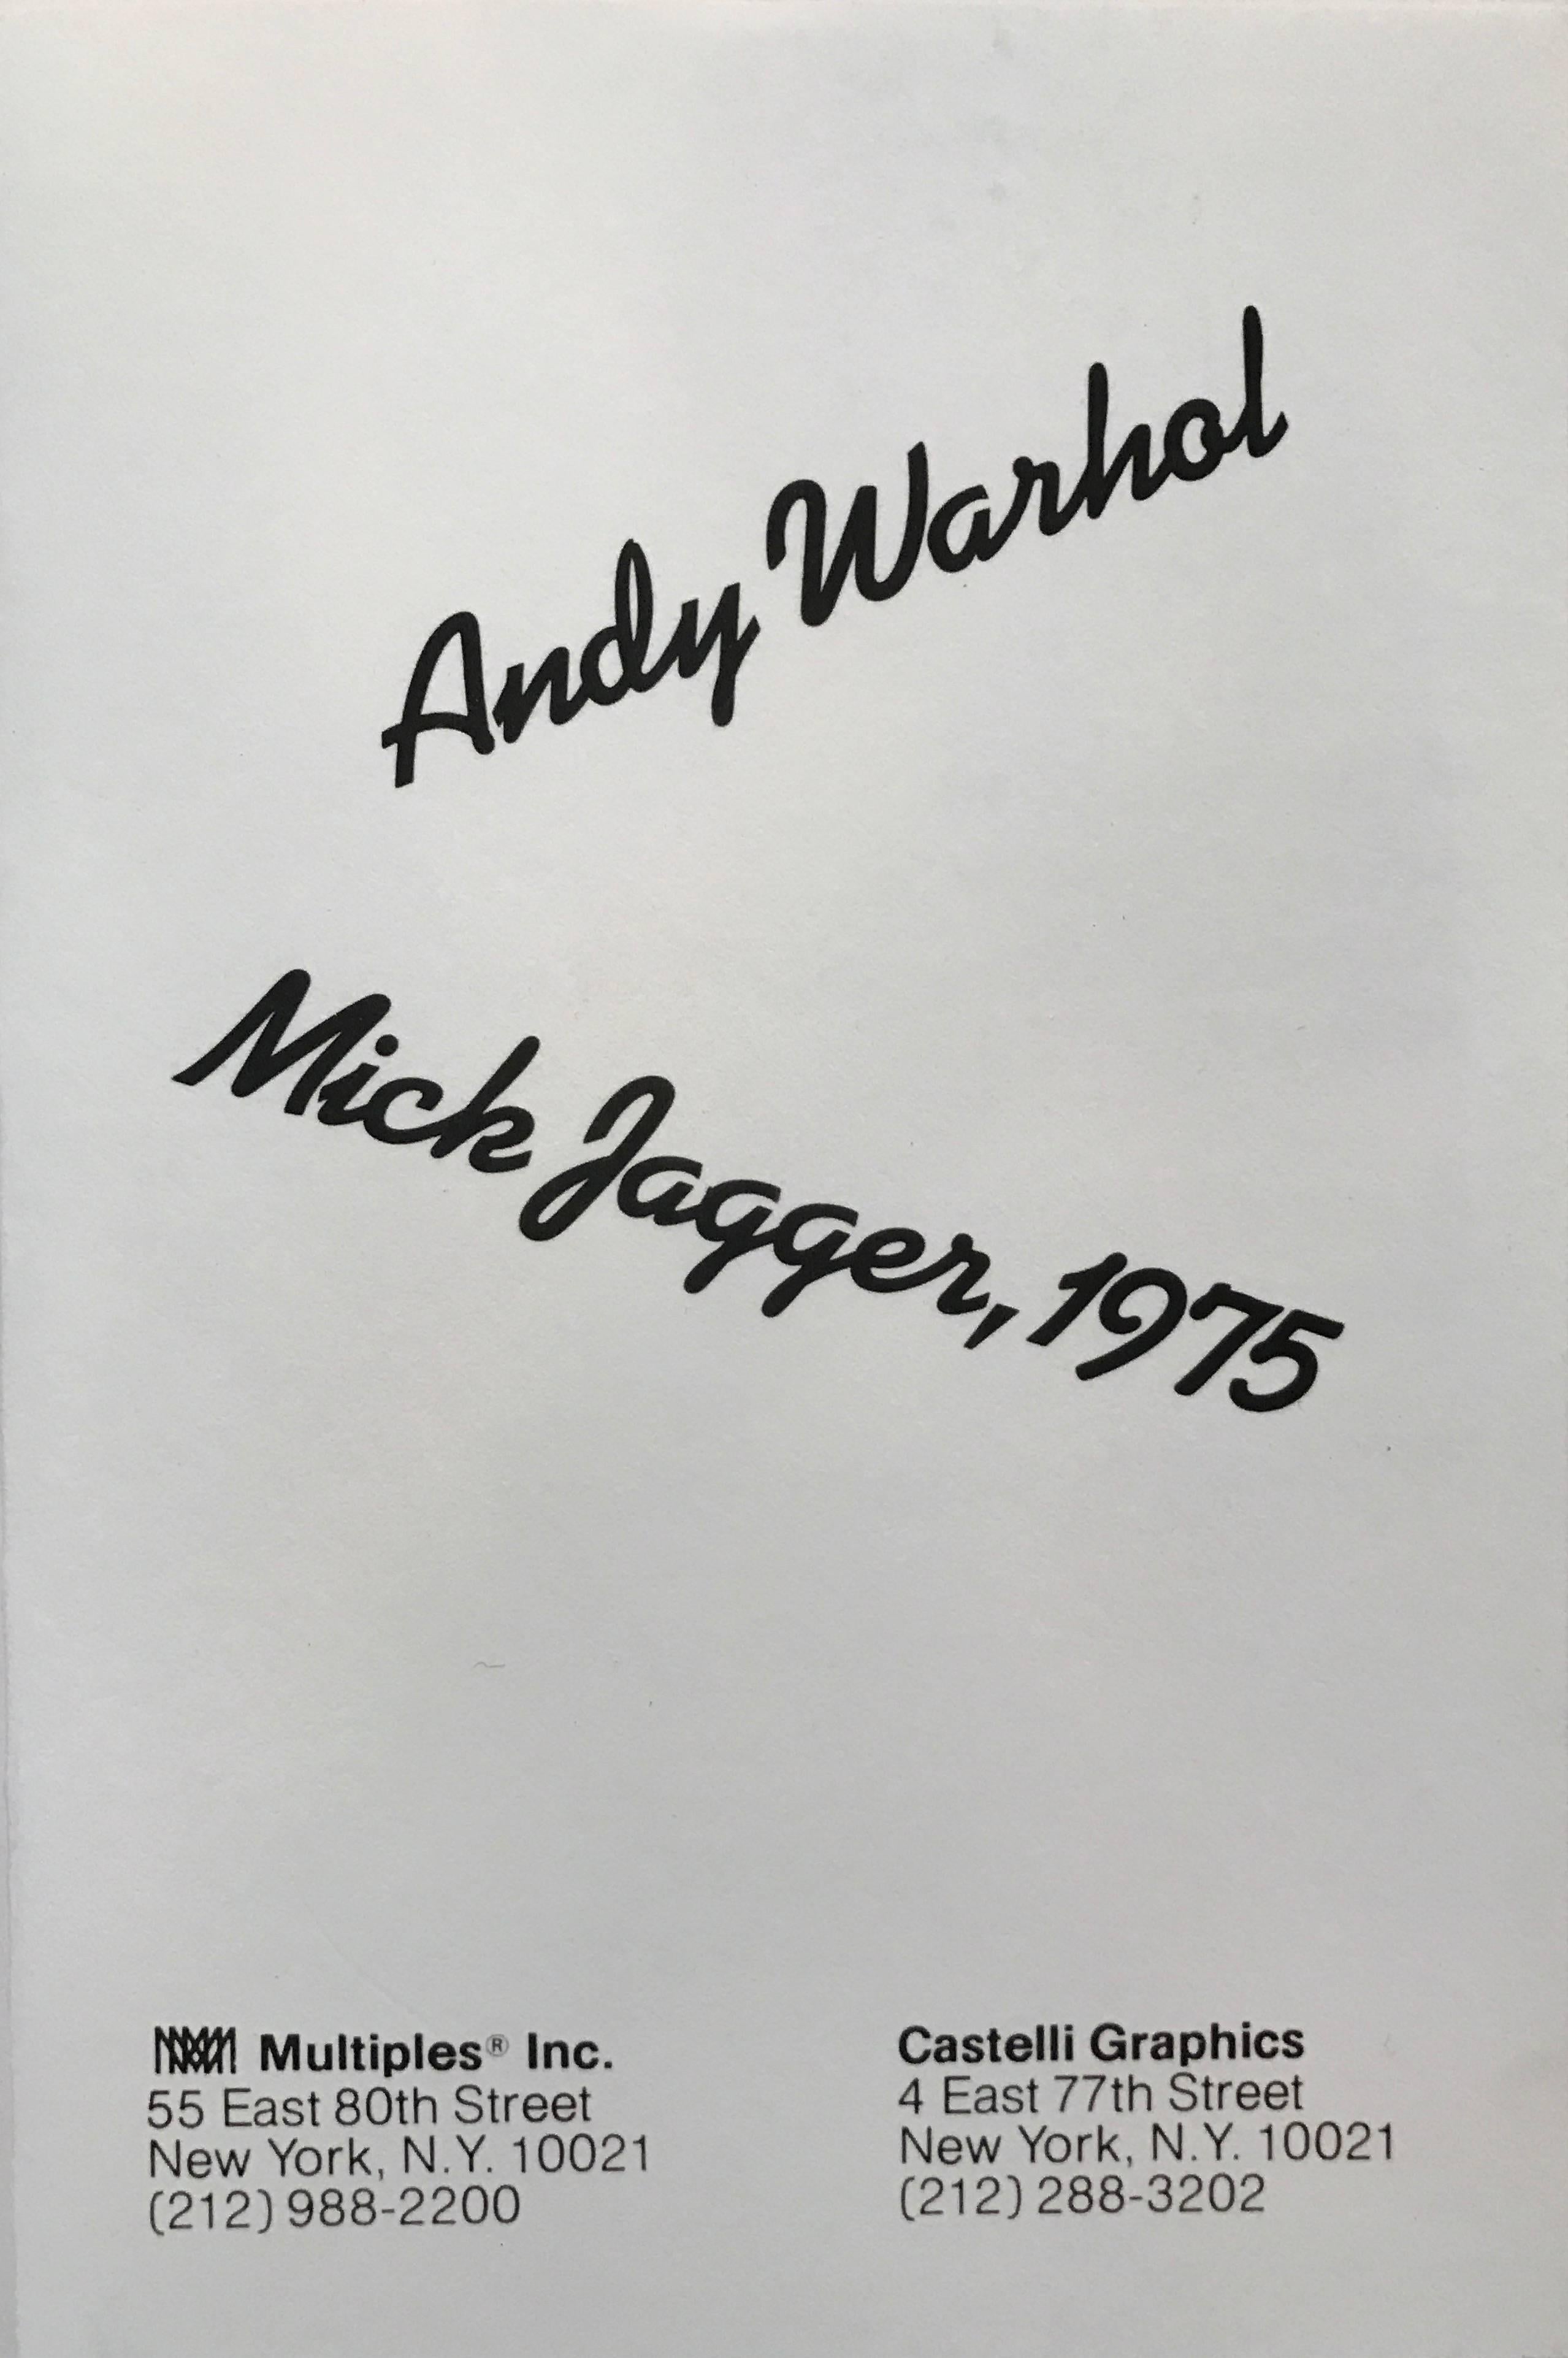 Mick Jagger announcement  - Contemporary Print by (after) Andy Warhol